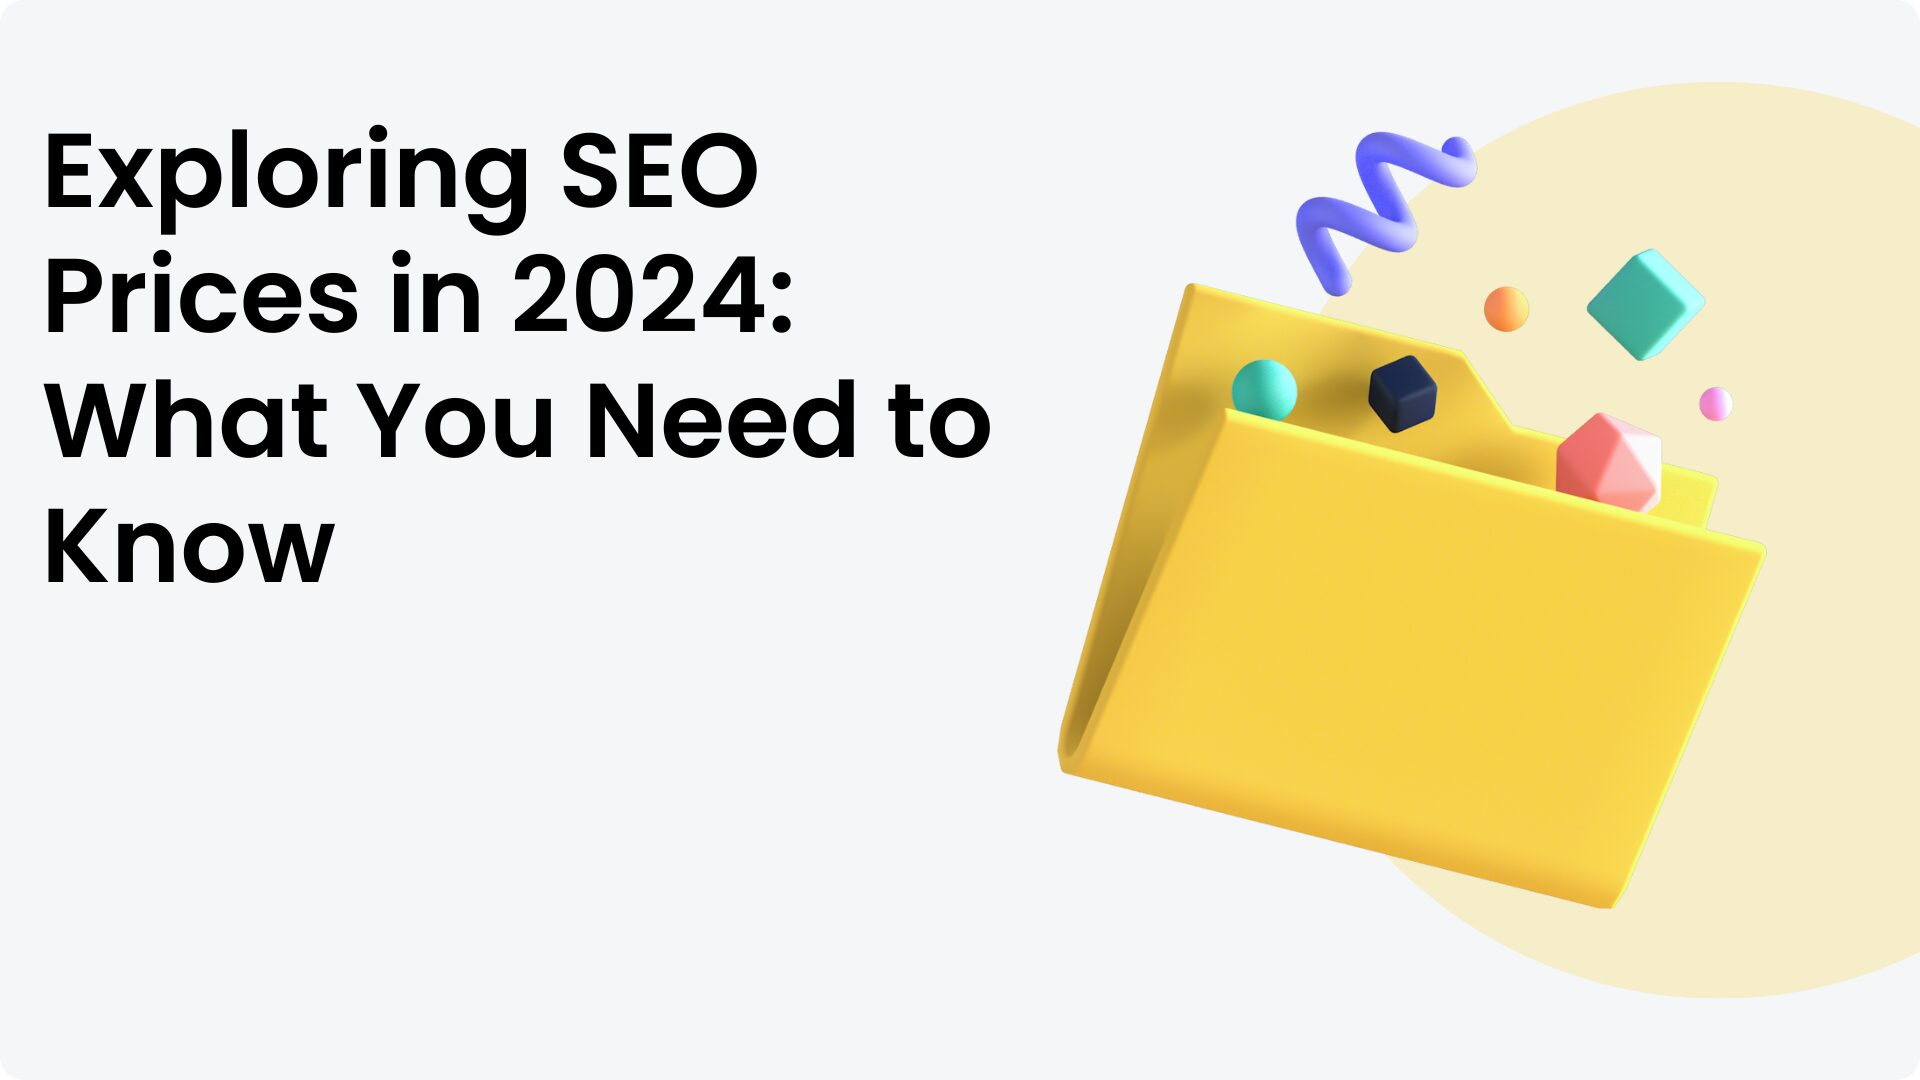 Exploring SEO Prices in 2024: What You Need to Know